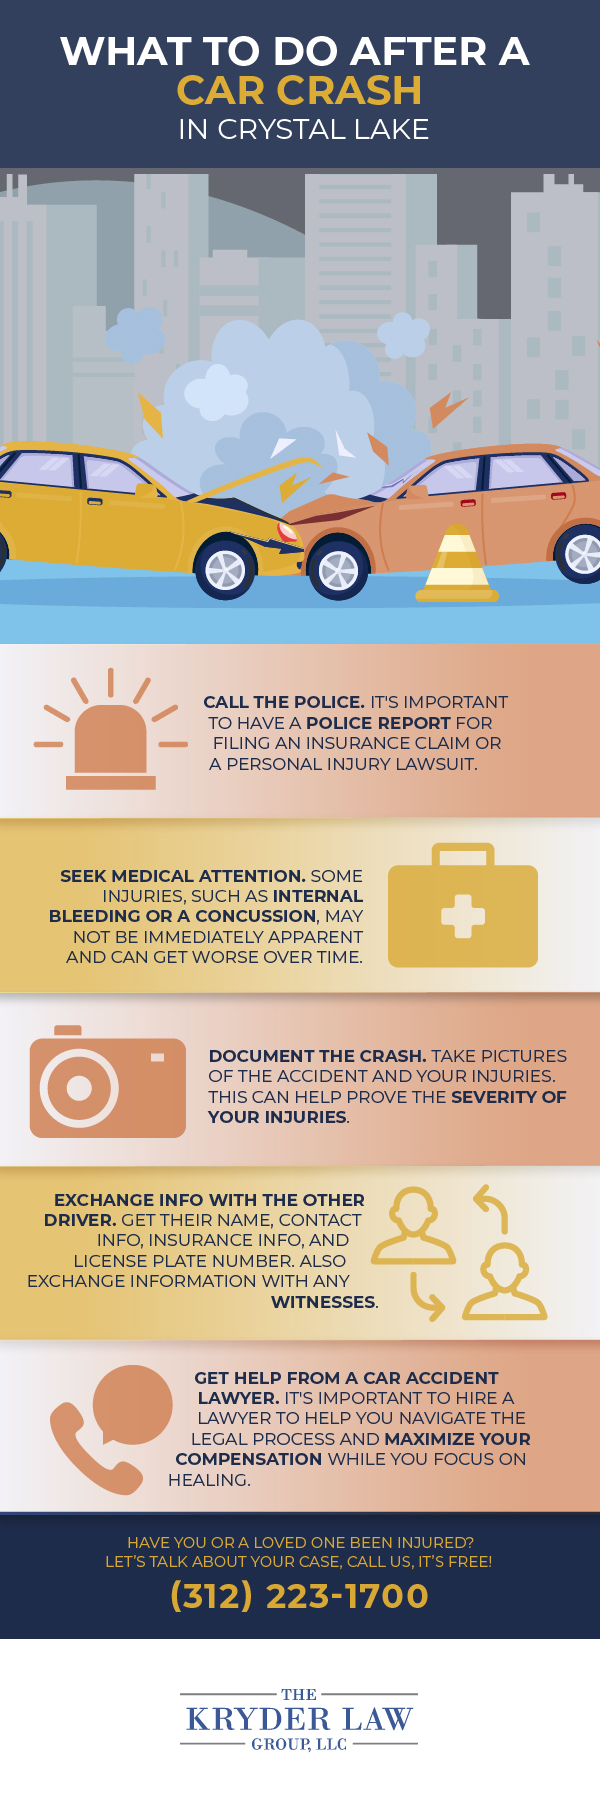 The Benefits of Hiring a Crystal Lake Car Accident Lawyer Infographic)